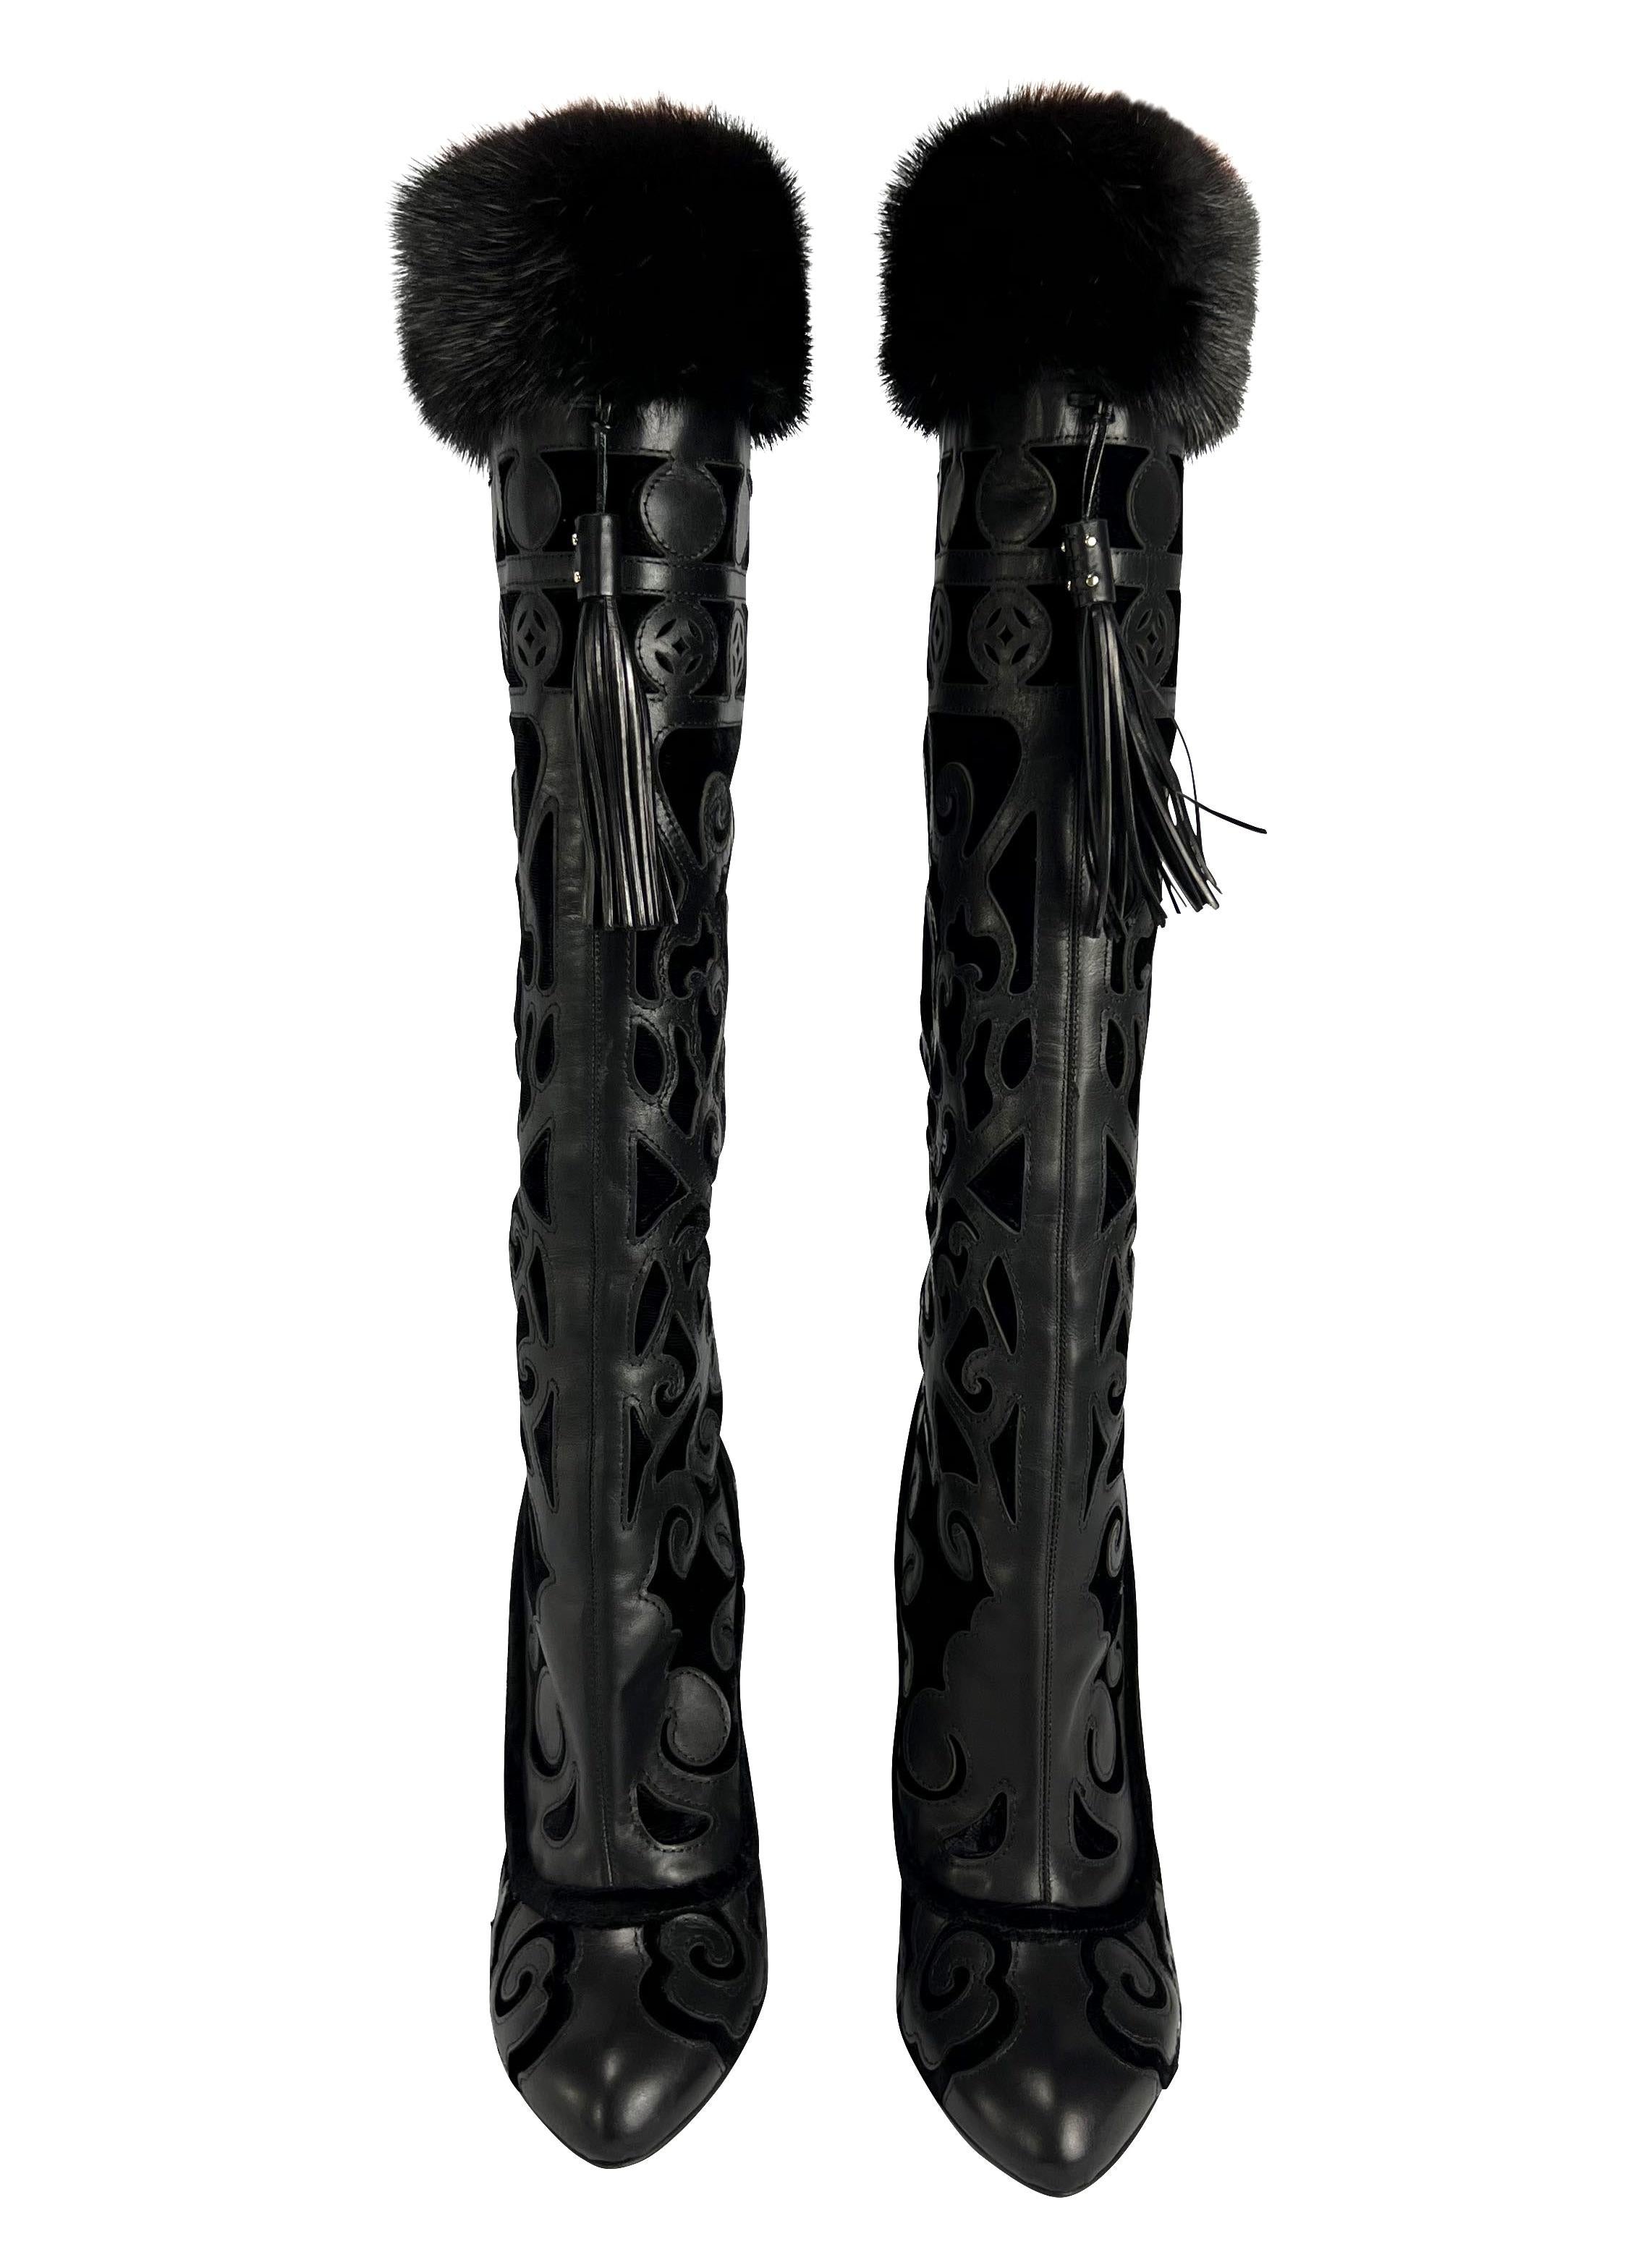 Presenting a pair of detailed leather and fur Yves Saint Laurent Rive Gauche wedge boots designed by Tom Ford. These boots are a part of the Fall/Winter 2004 collection and debuted on the runway on look number 16, modeled by Yasmin Warsame. This